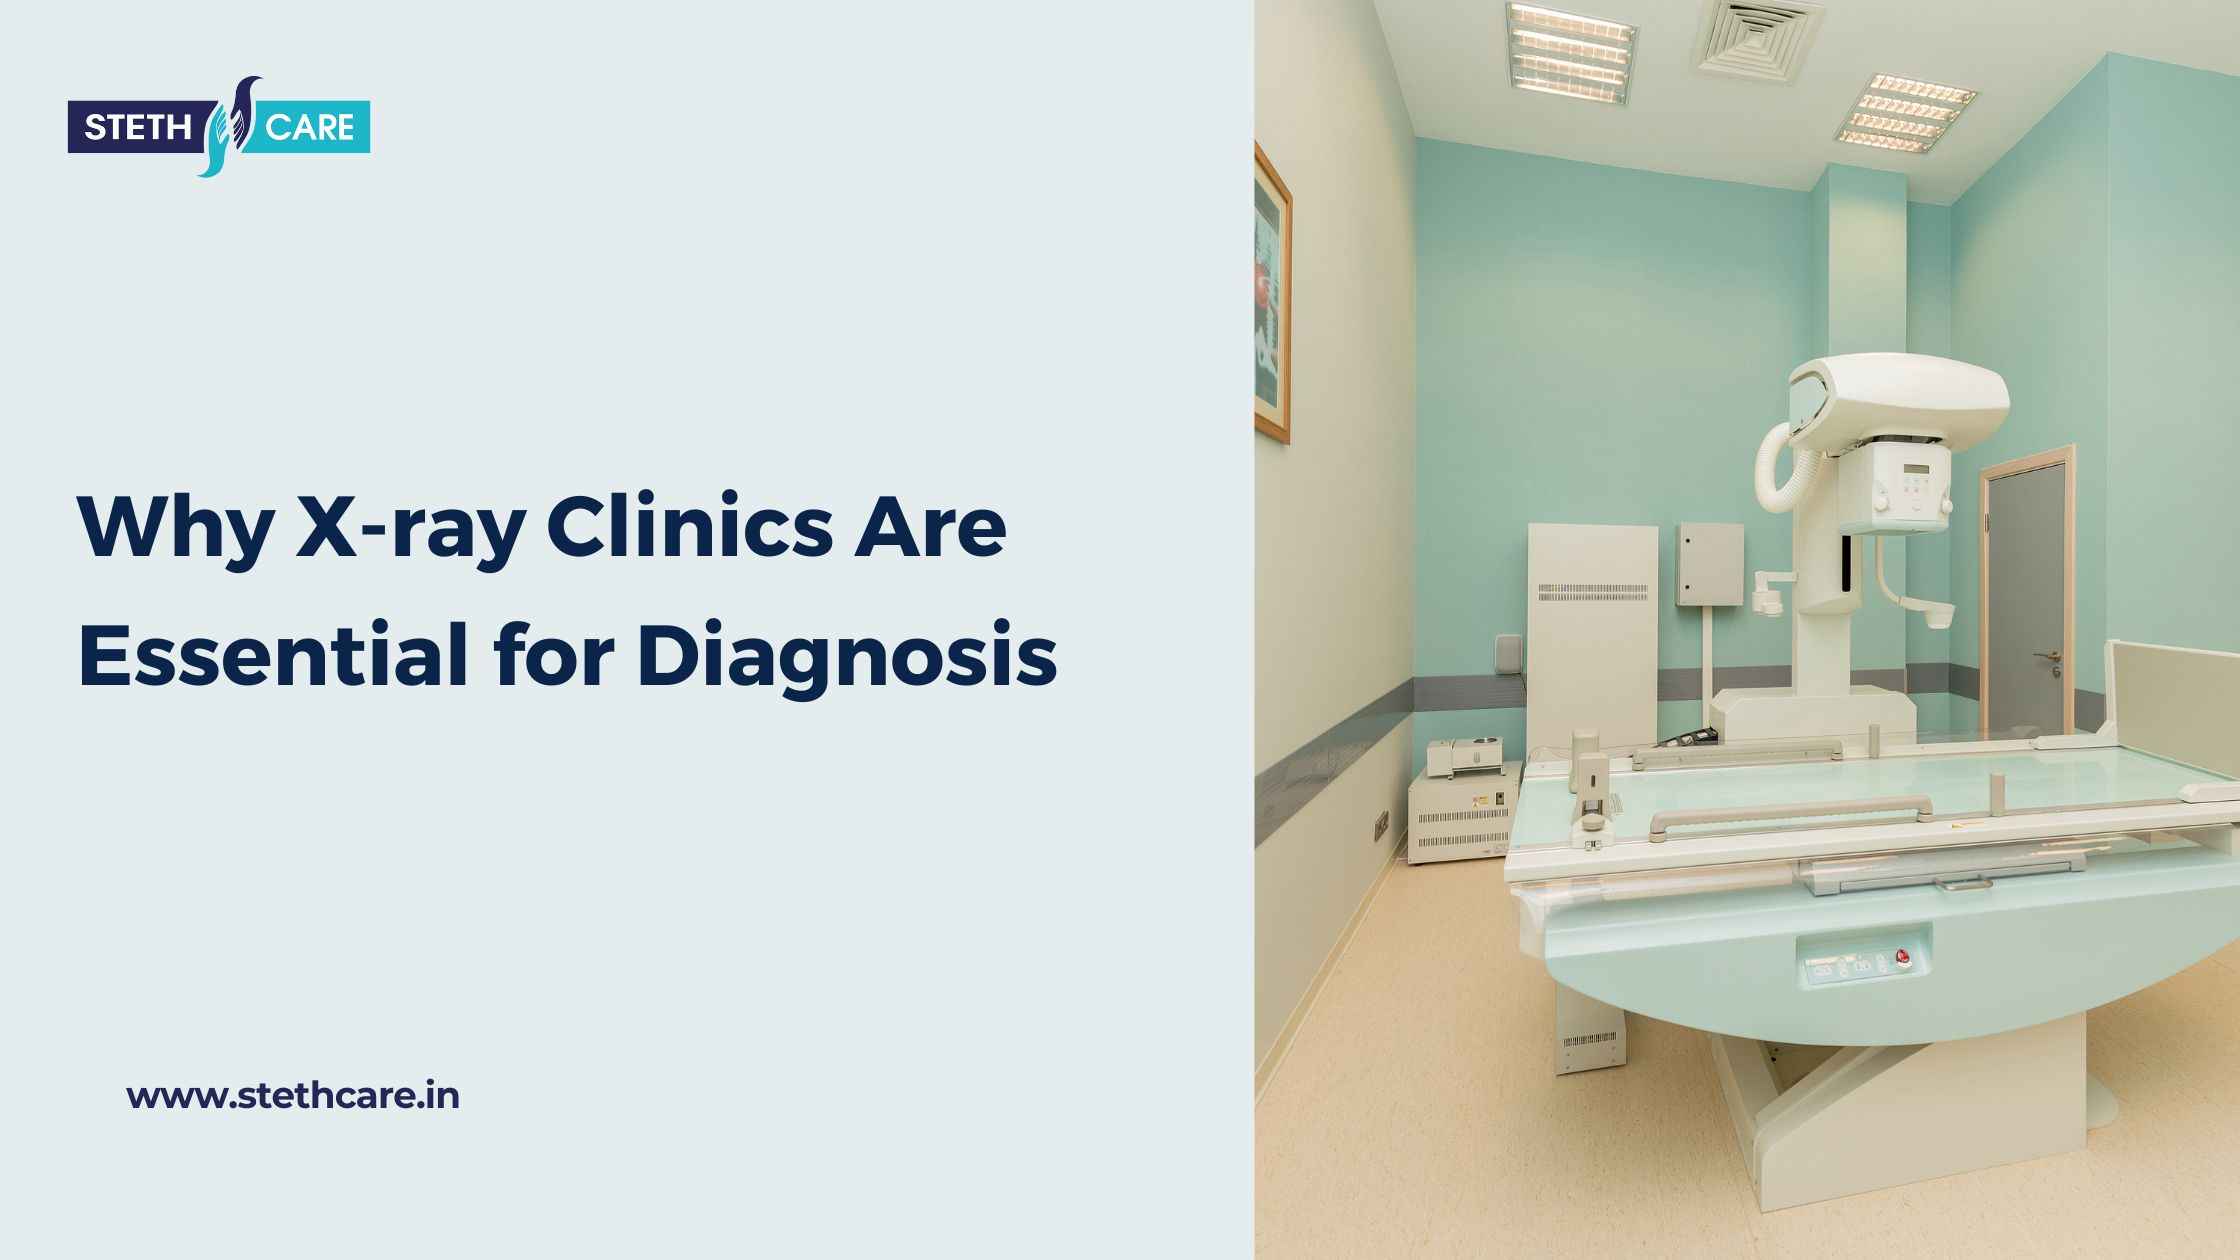 Why X-ray Clinics Are Essential for Diagnosis